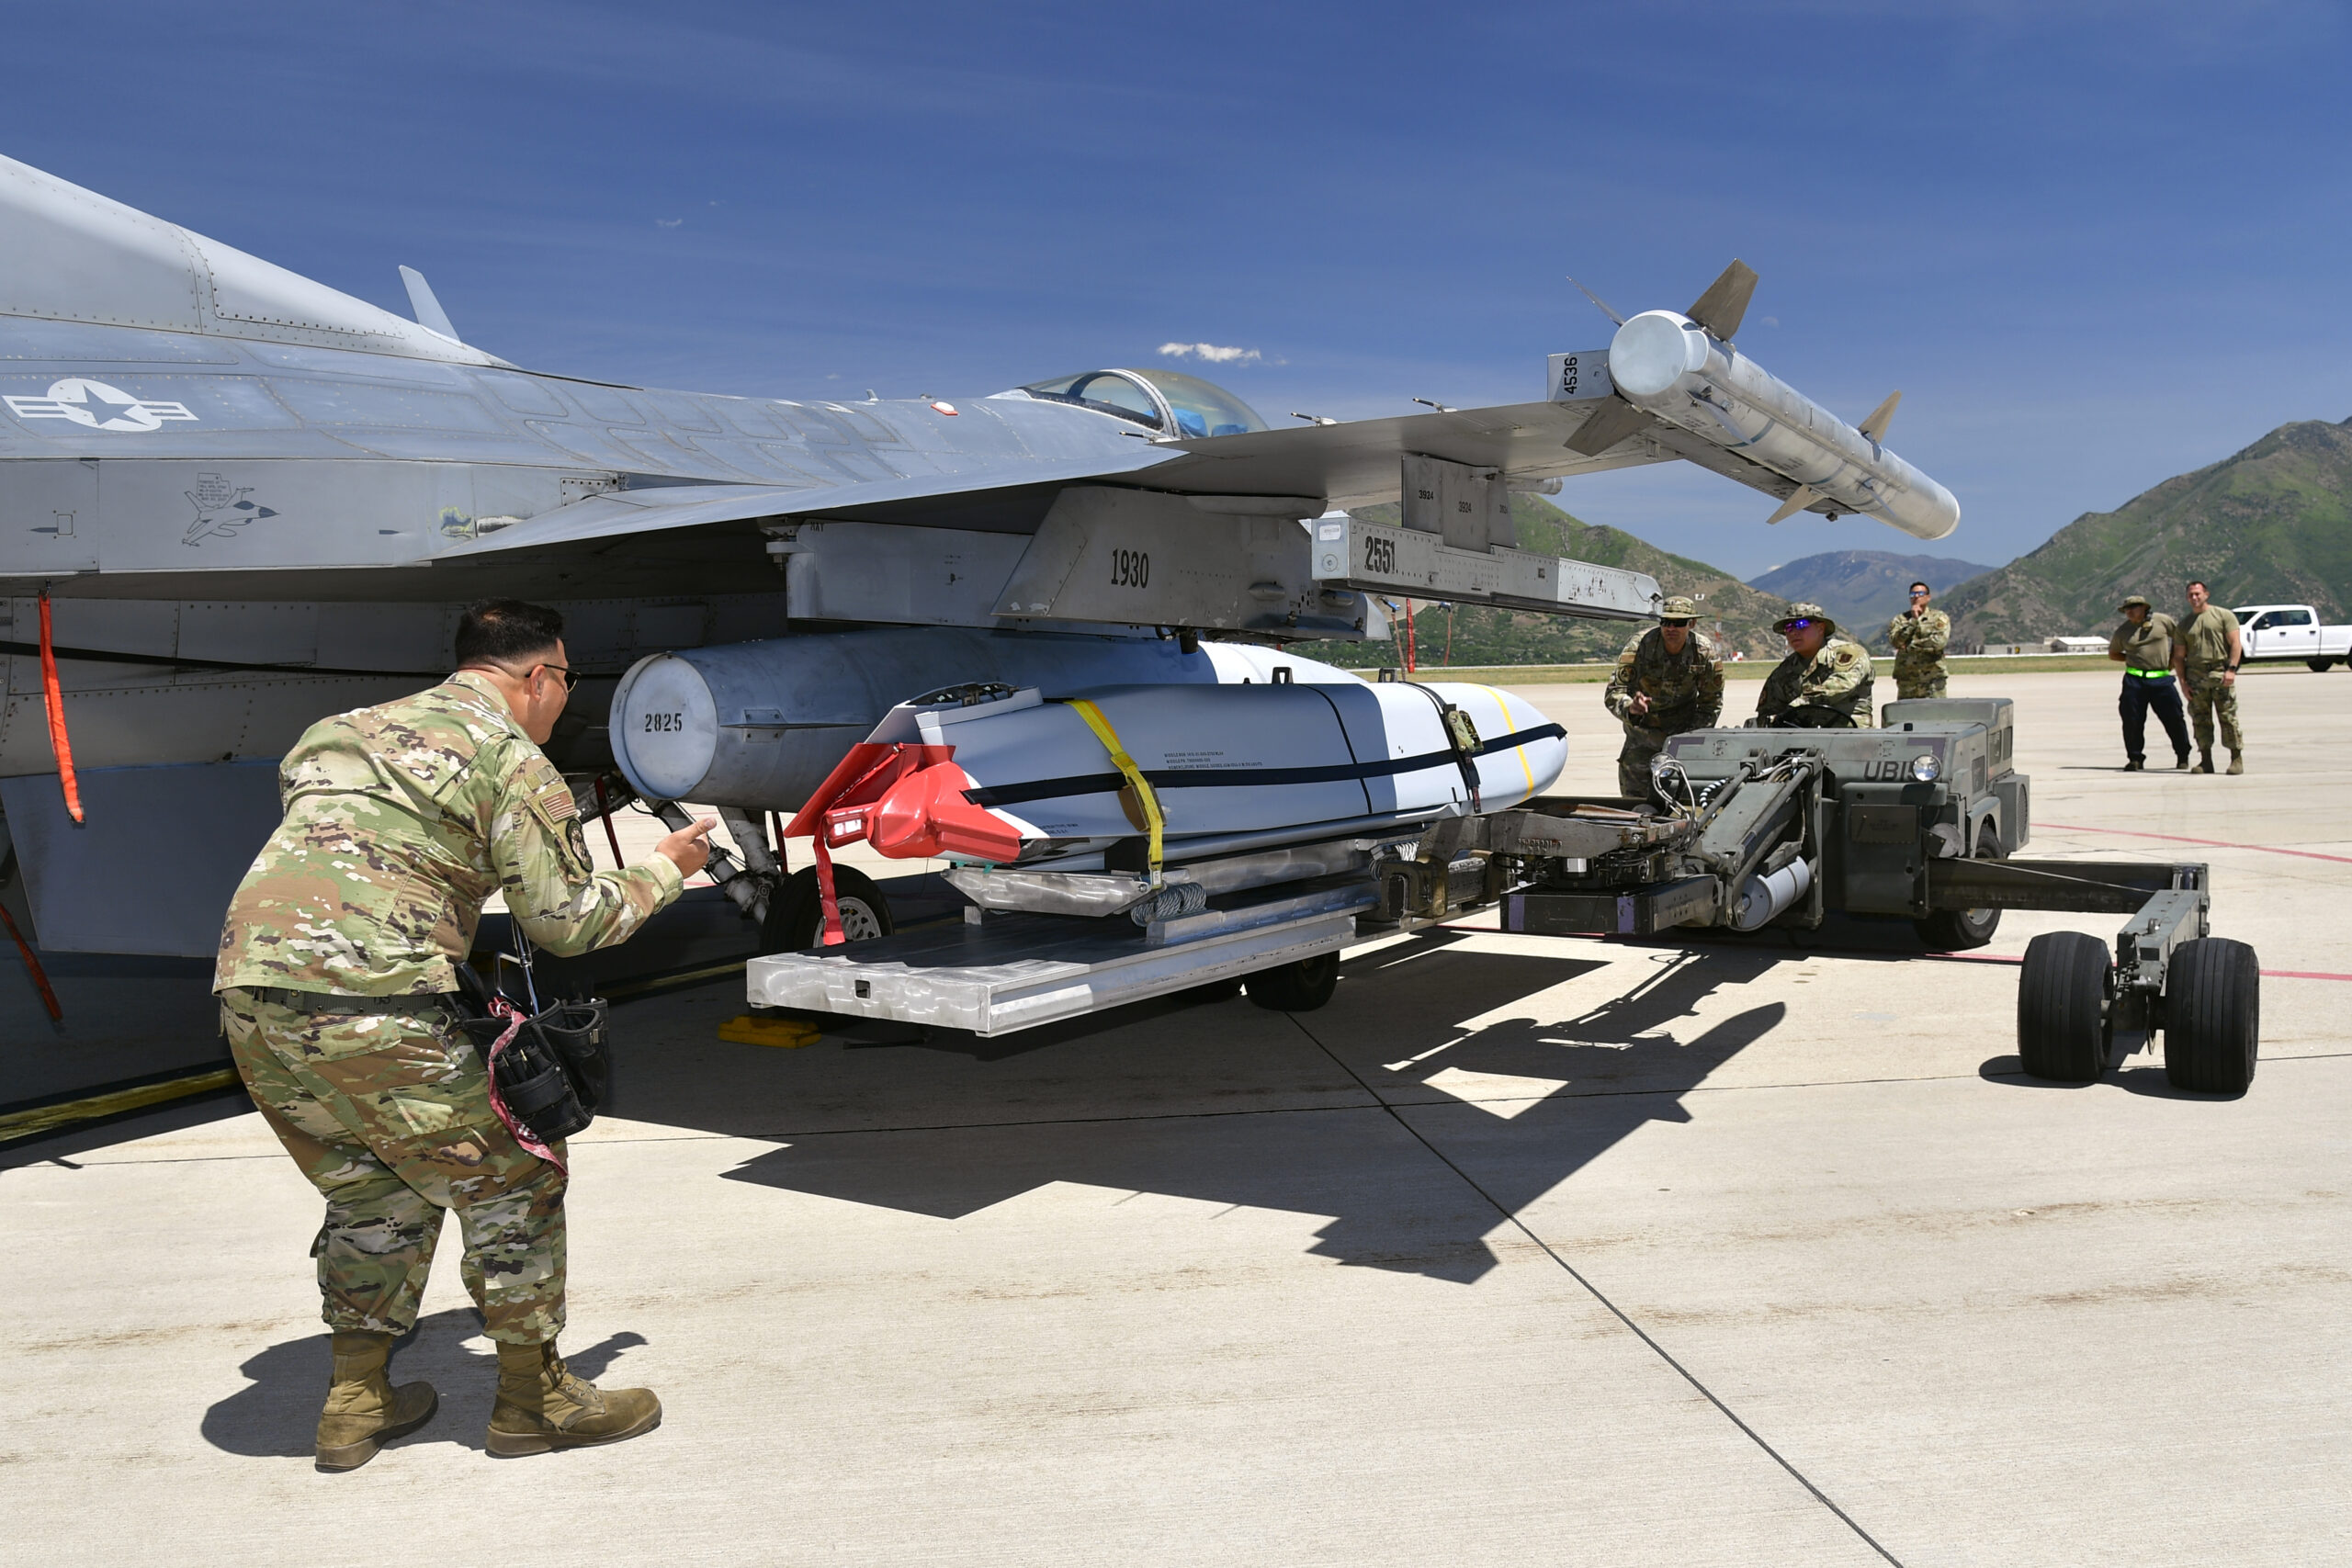 Airmen with the Air National Guard Air Force Reserve Command Test Center (AATC) load a Joint Air-to-Surface Standoff Missile (JASSM) on a pre-block F-16 for a test launch. (US Air Force photo).